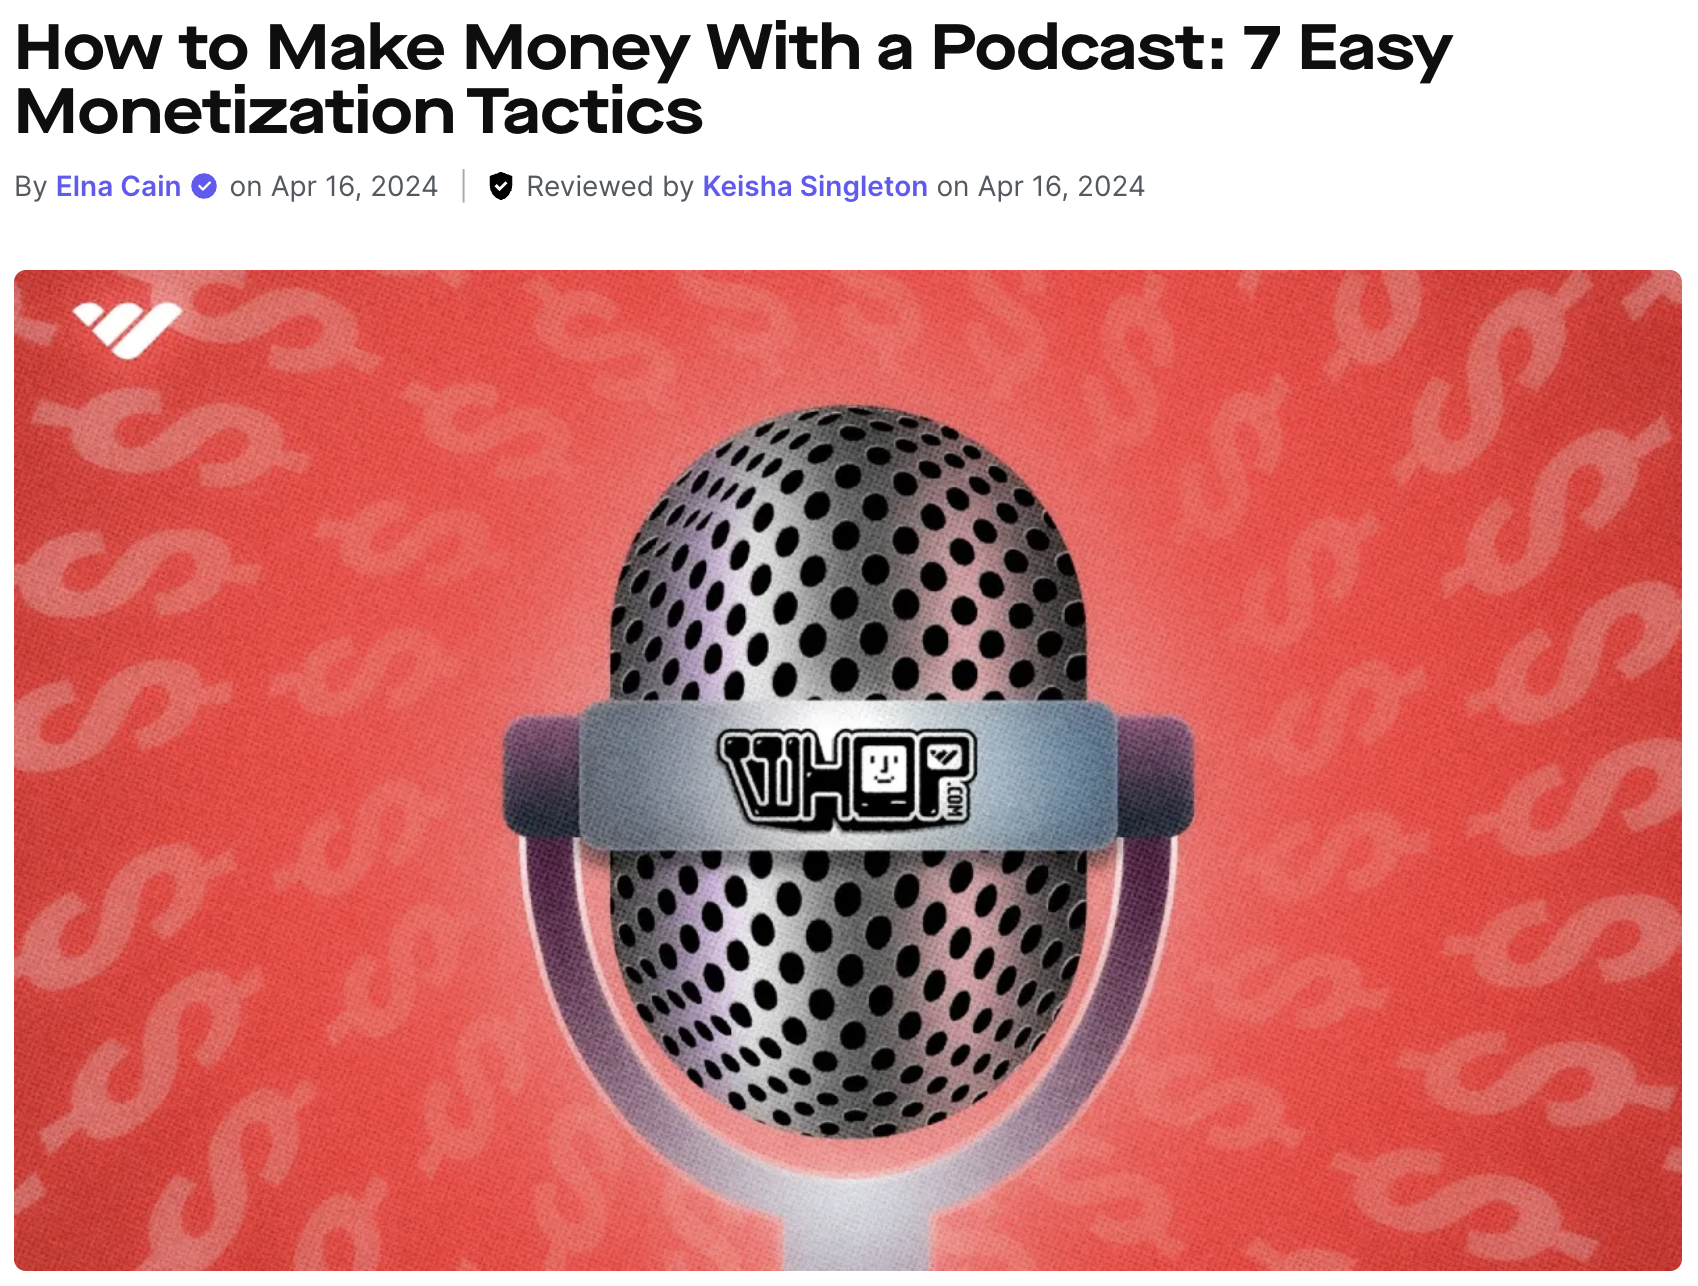 How to Make Money With a Podcast: 7 Easy Monetization Tactics